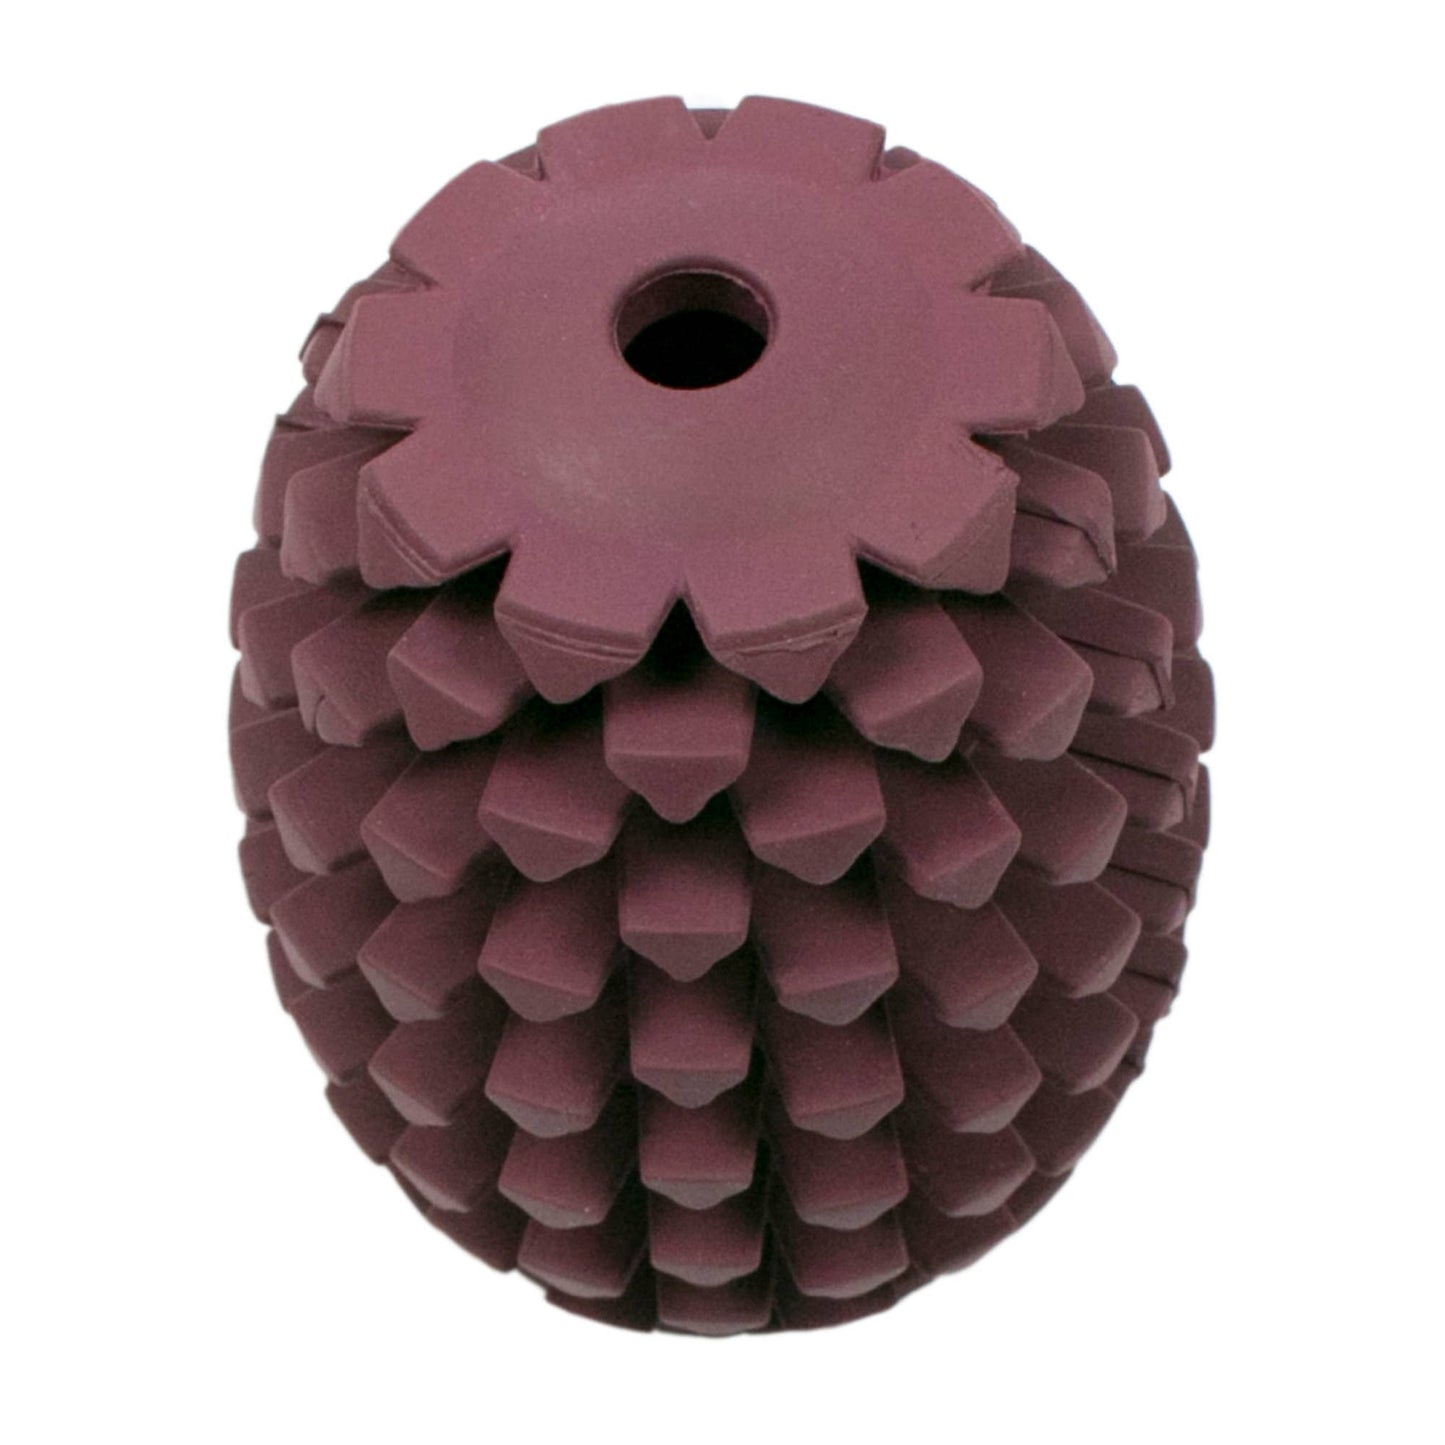 Tall Tails Natural Rubber Pinecone Toy